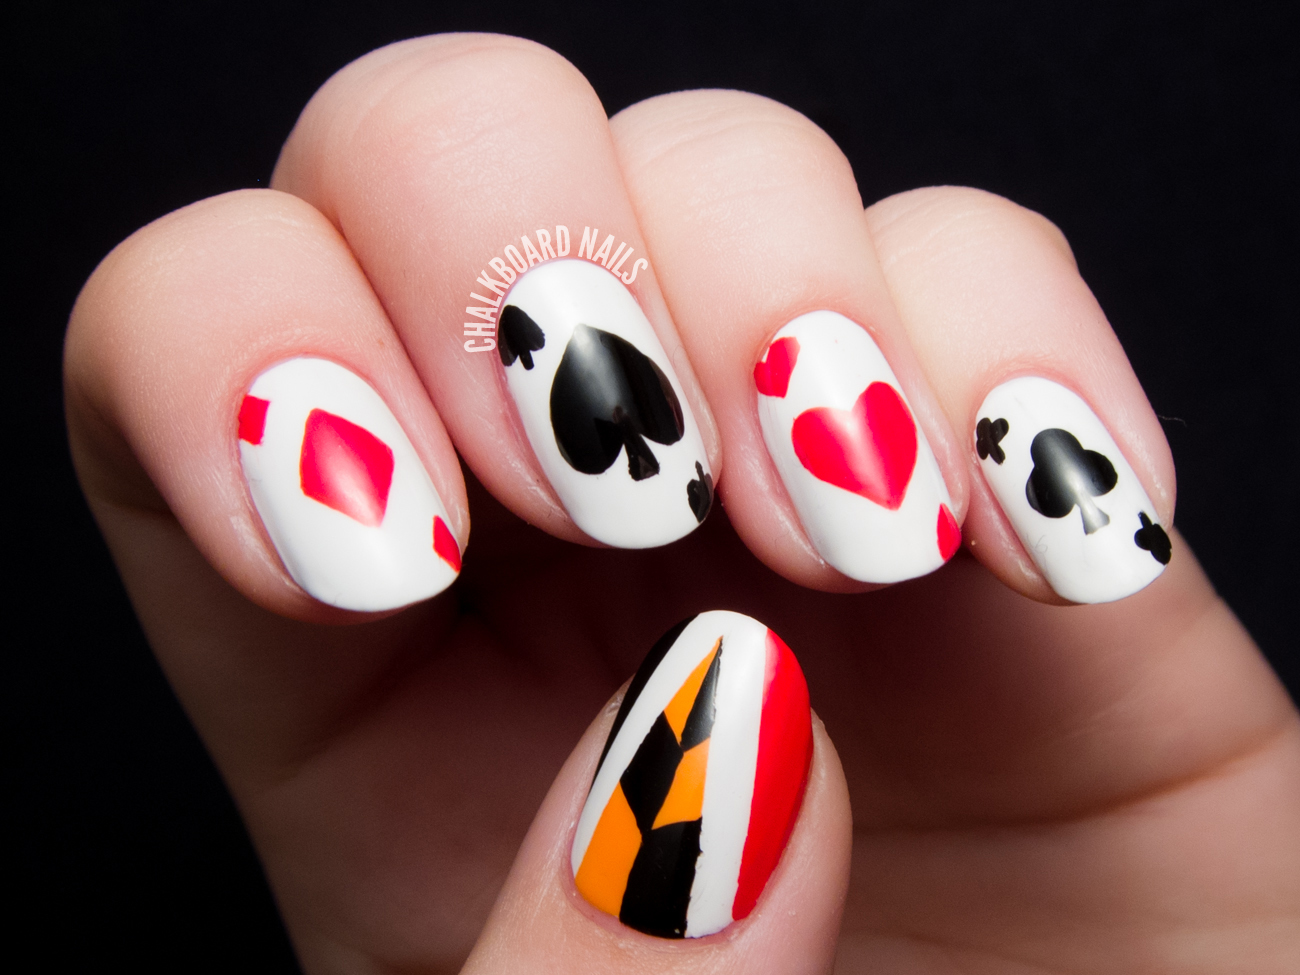 Red and Gold Nail Art for Queen of Hearts Costume - wide 5